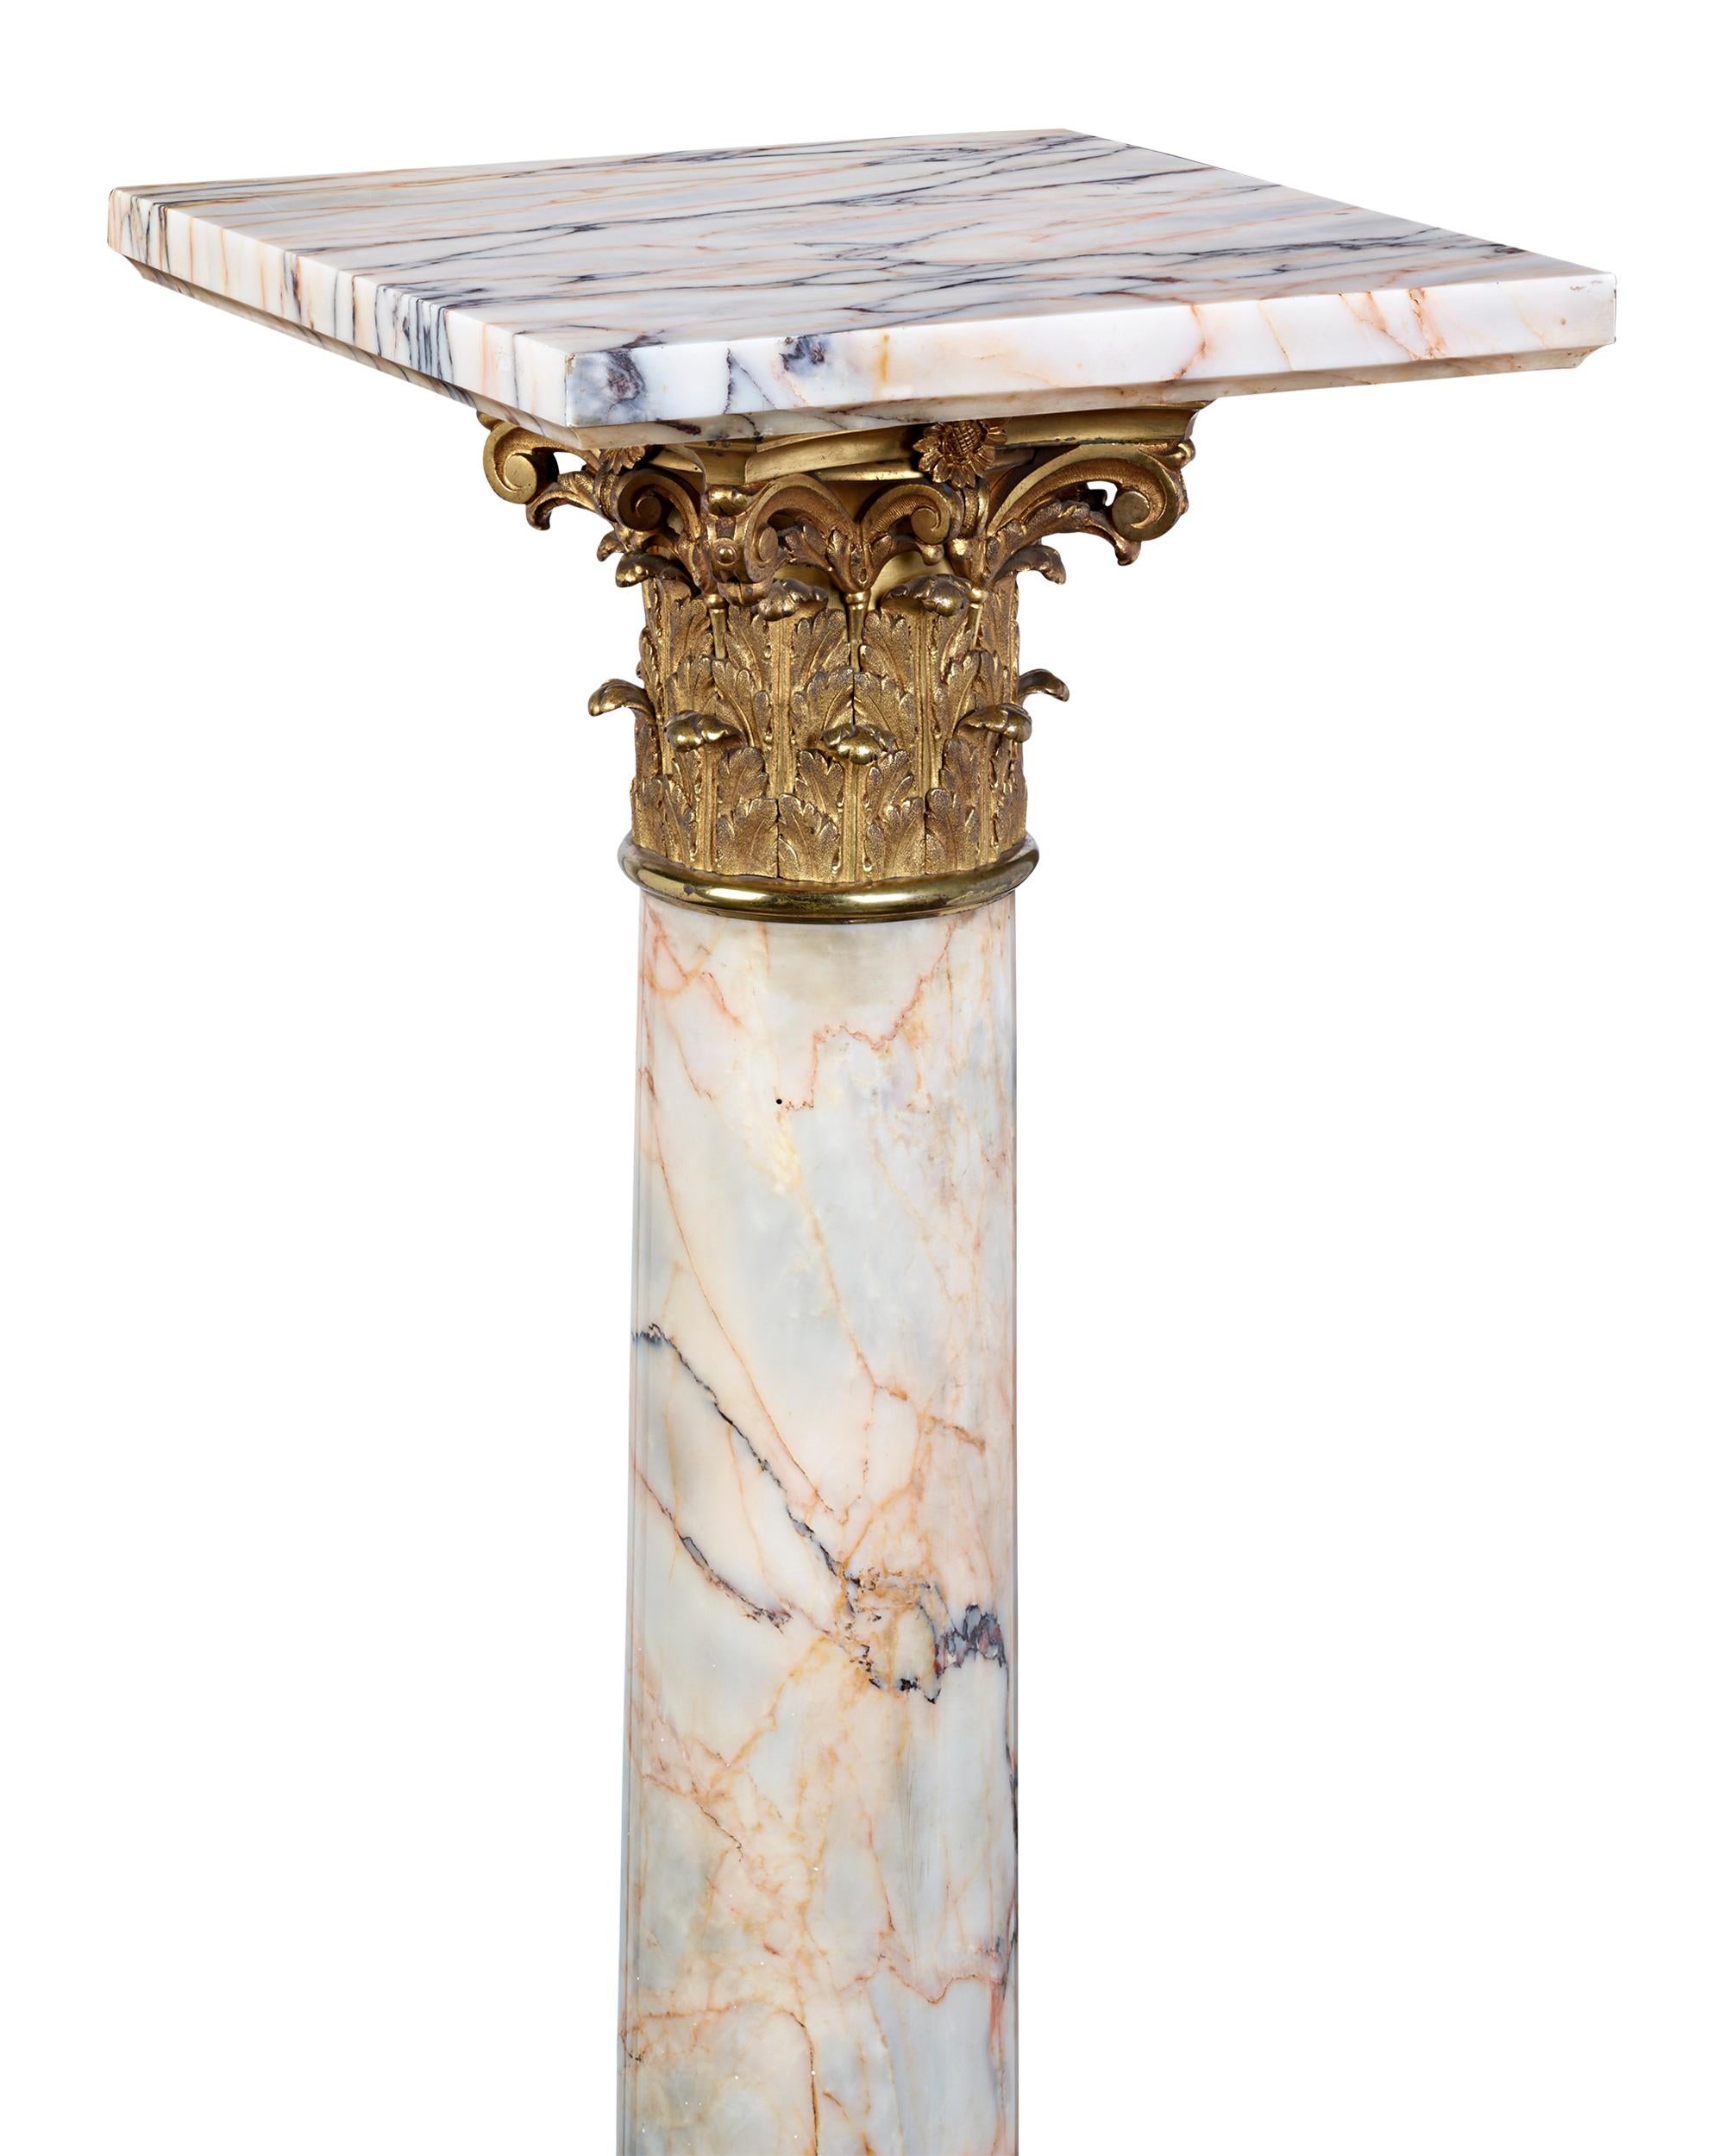 Neoclassical Marble and Gilt Bronze Pedestals In Excellent Condition For Sale In New Orleans, LA